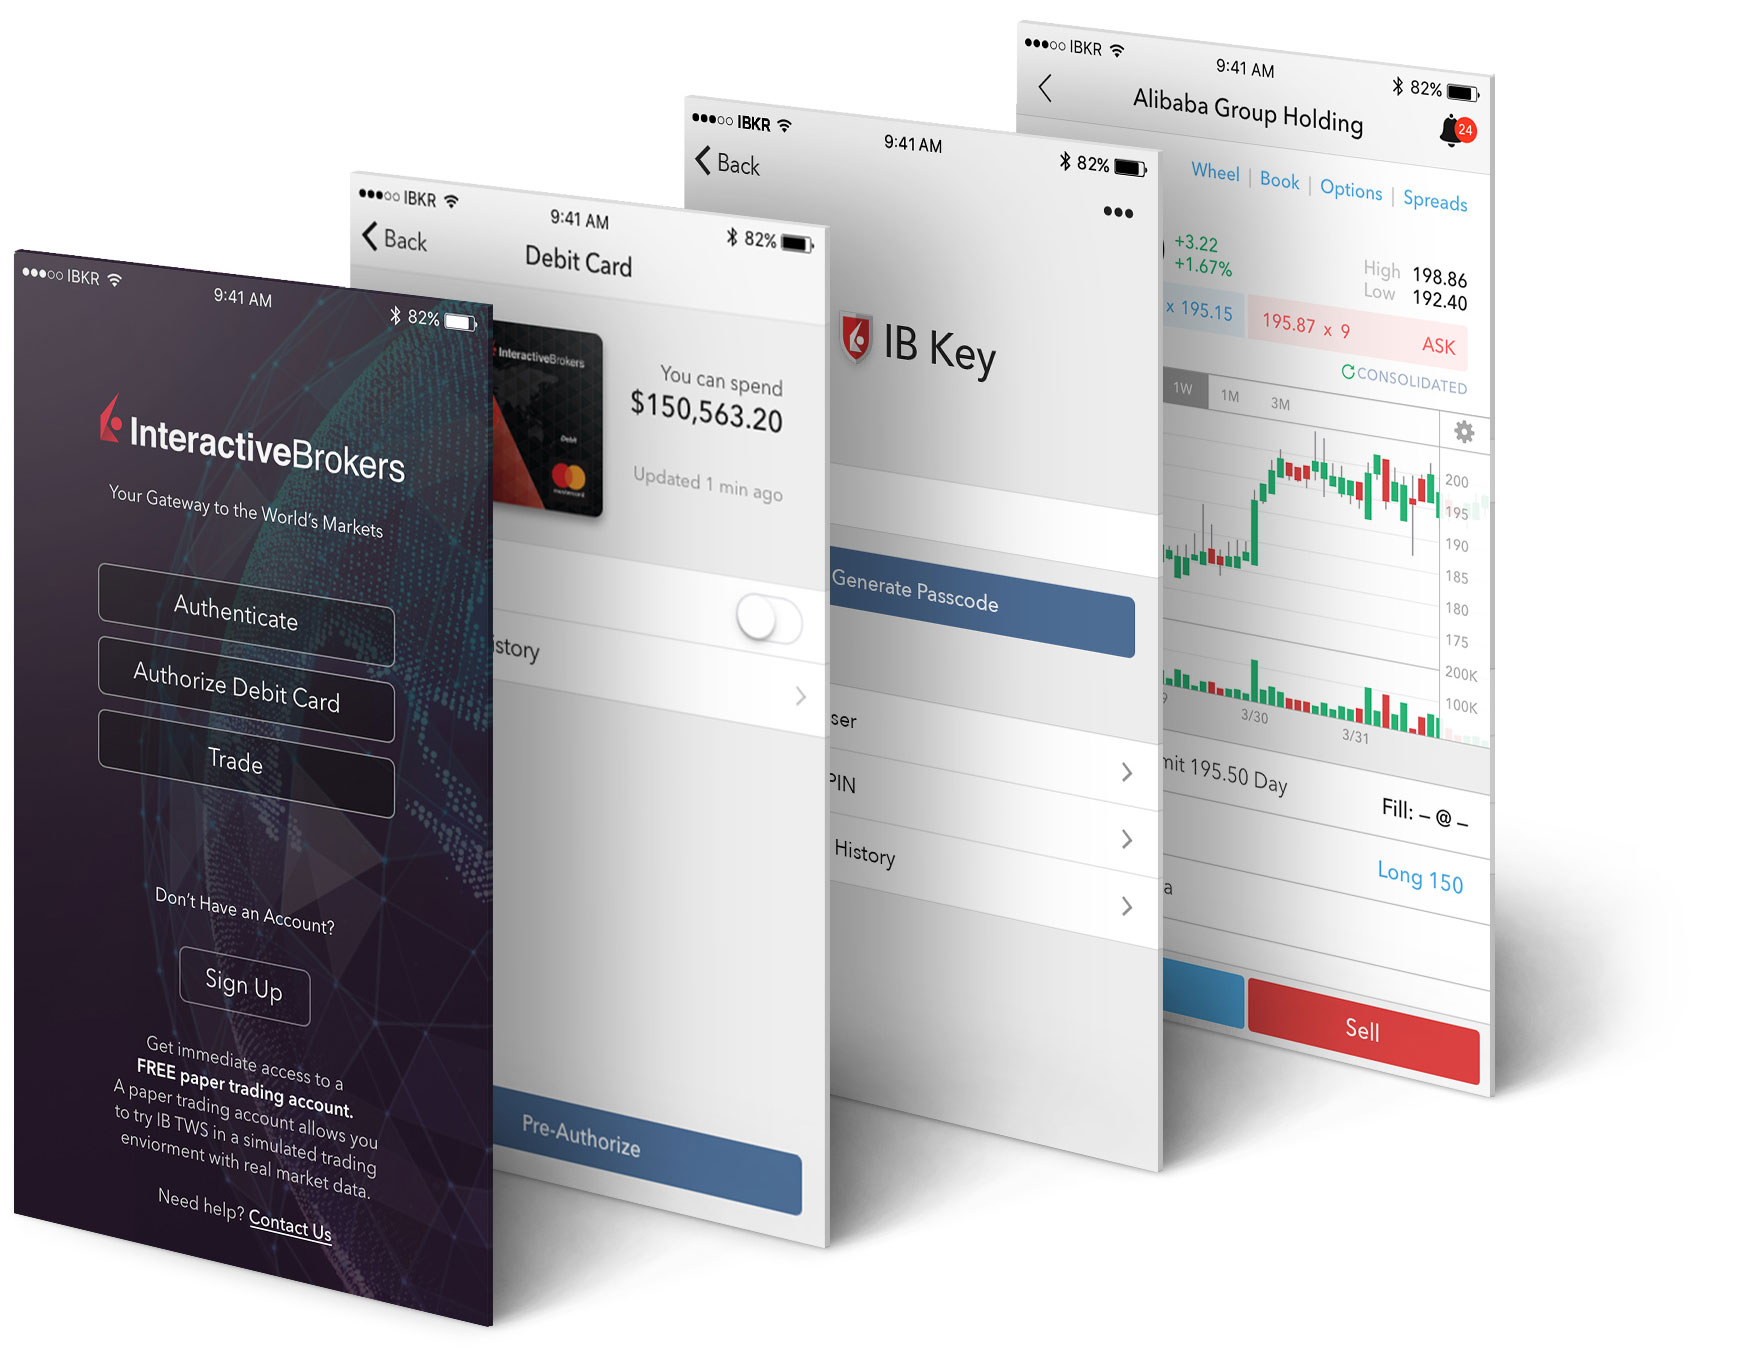 Mobile Trading | Interactive Brokers LLC